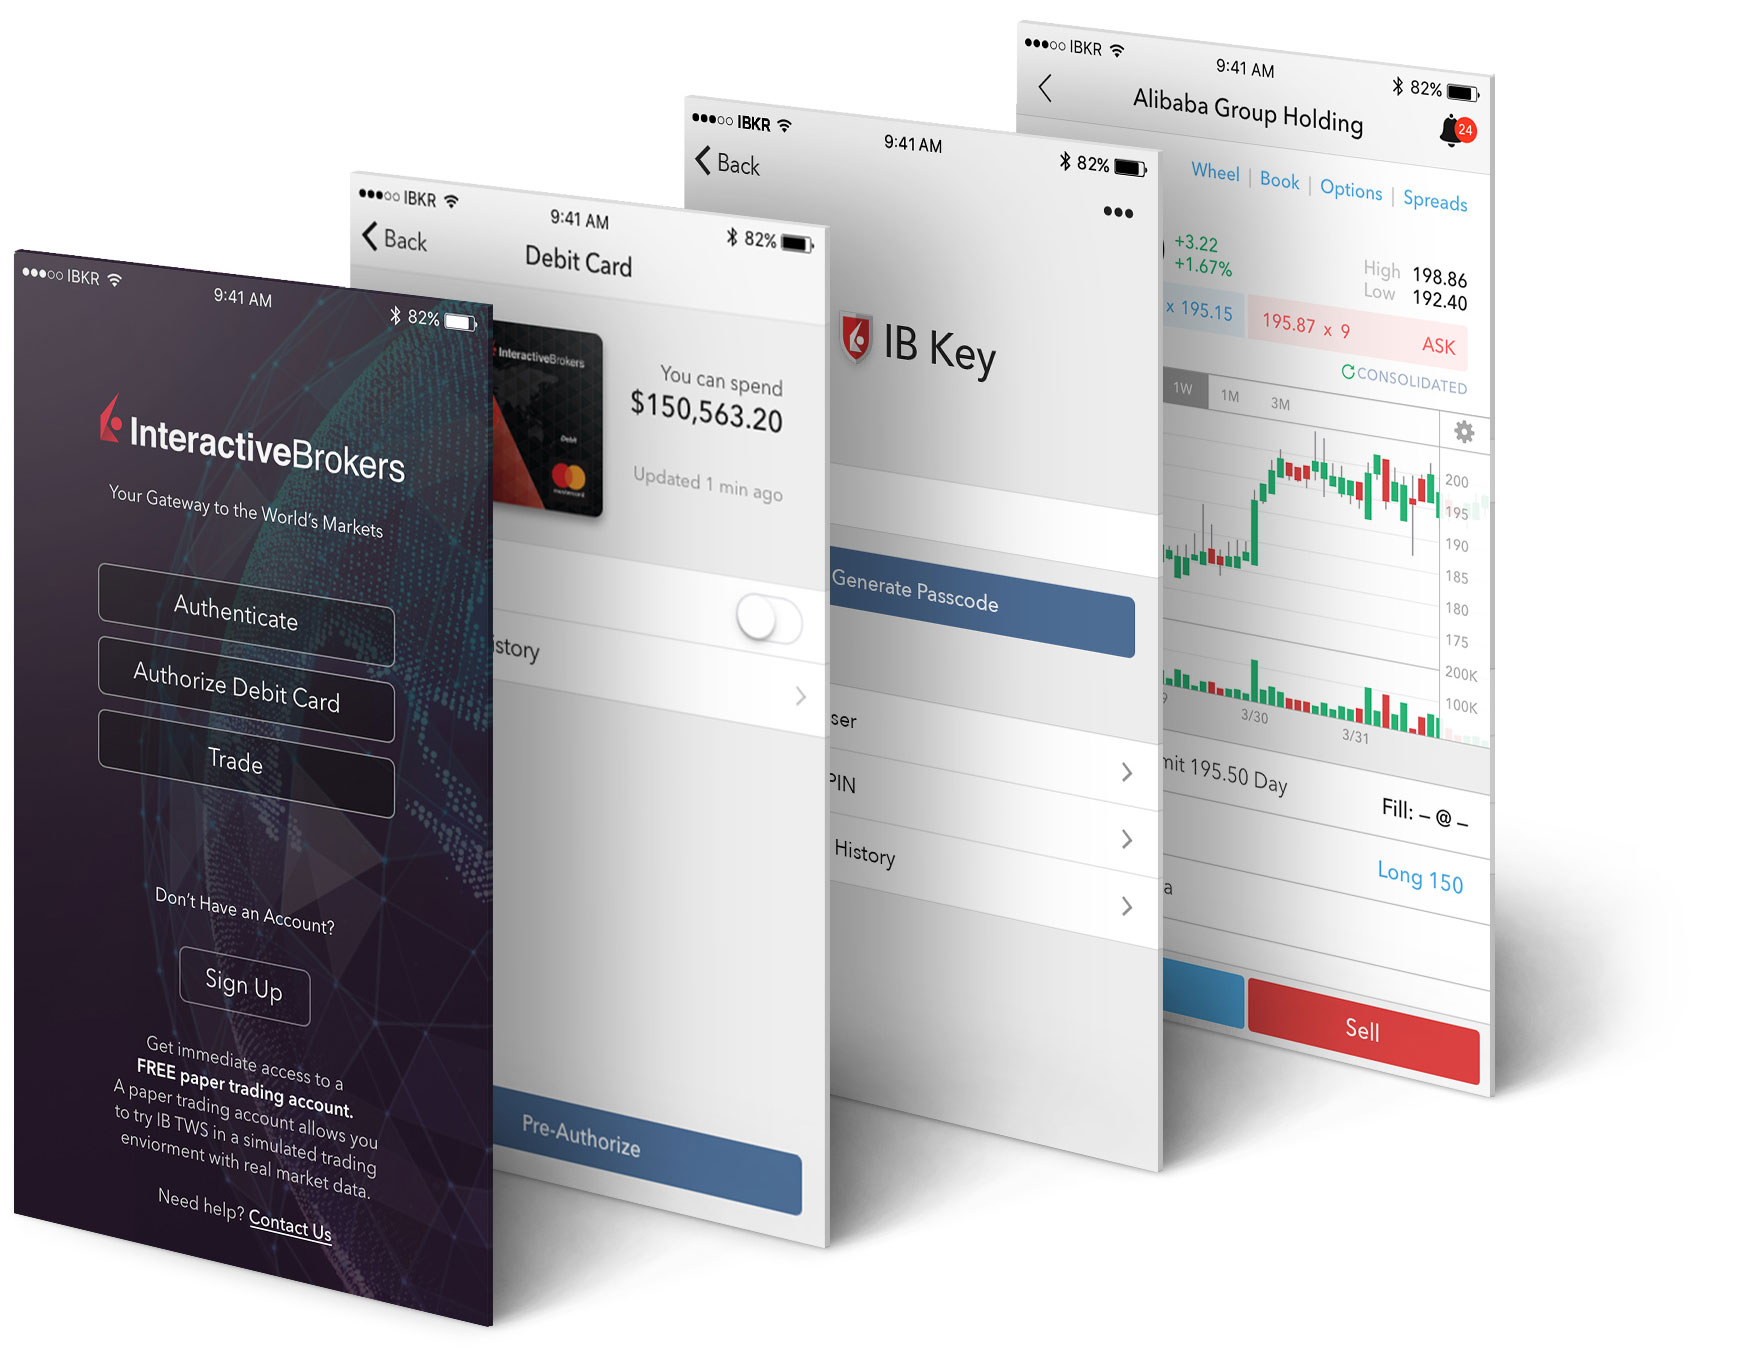 Mobile Trading | Interactive Brokers LLC